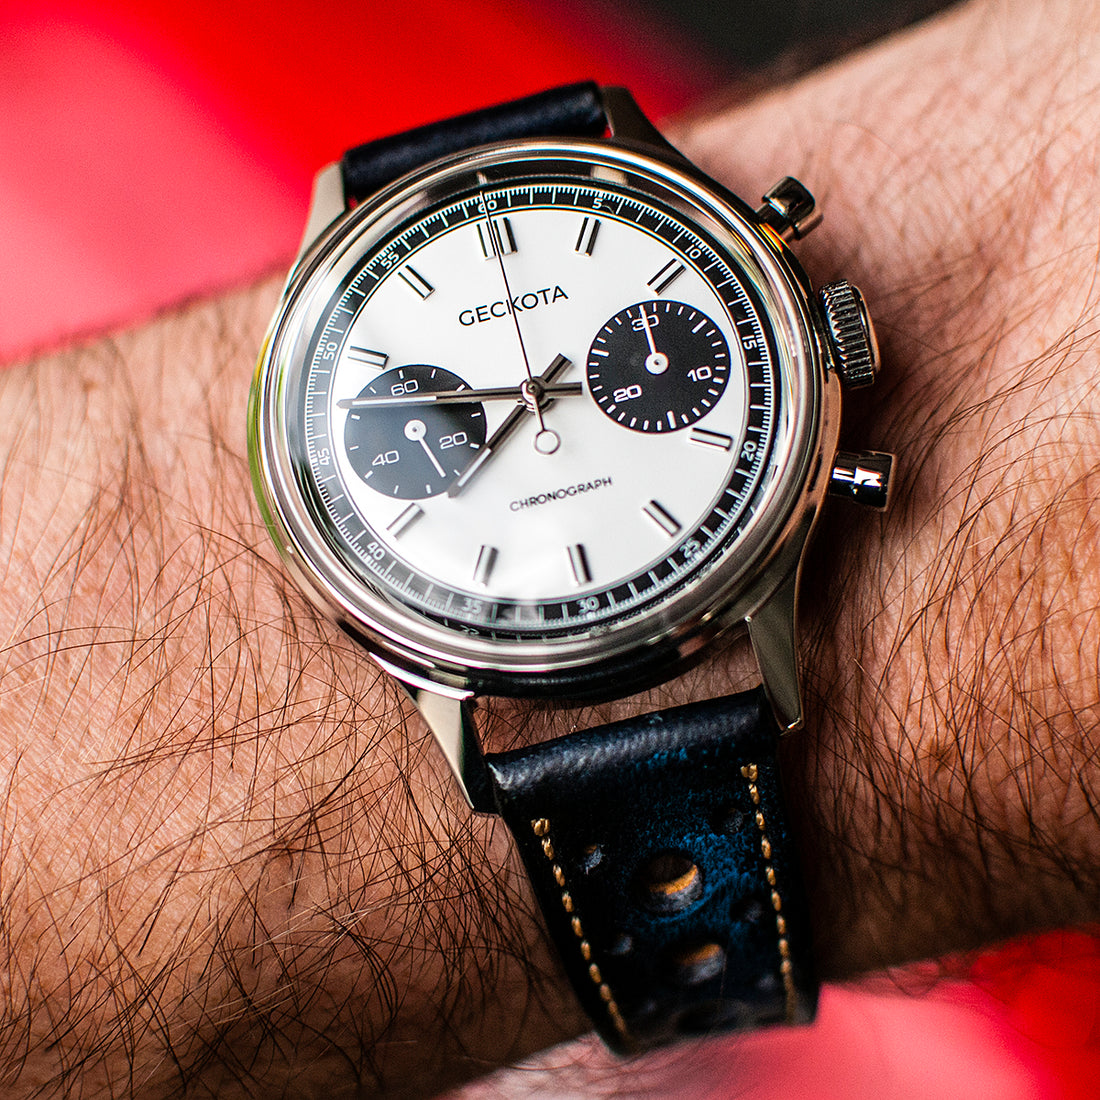 Geckota W-02 Vintage Mechanical Chronograph Racing Watch Review - The Vintage Experience Without the Hassle?